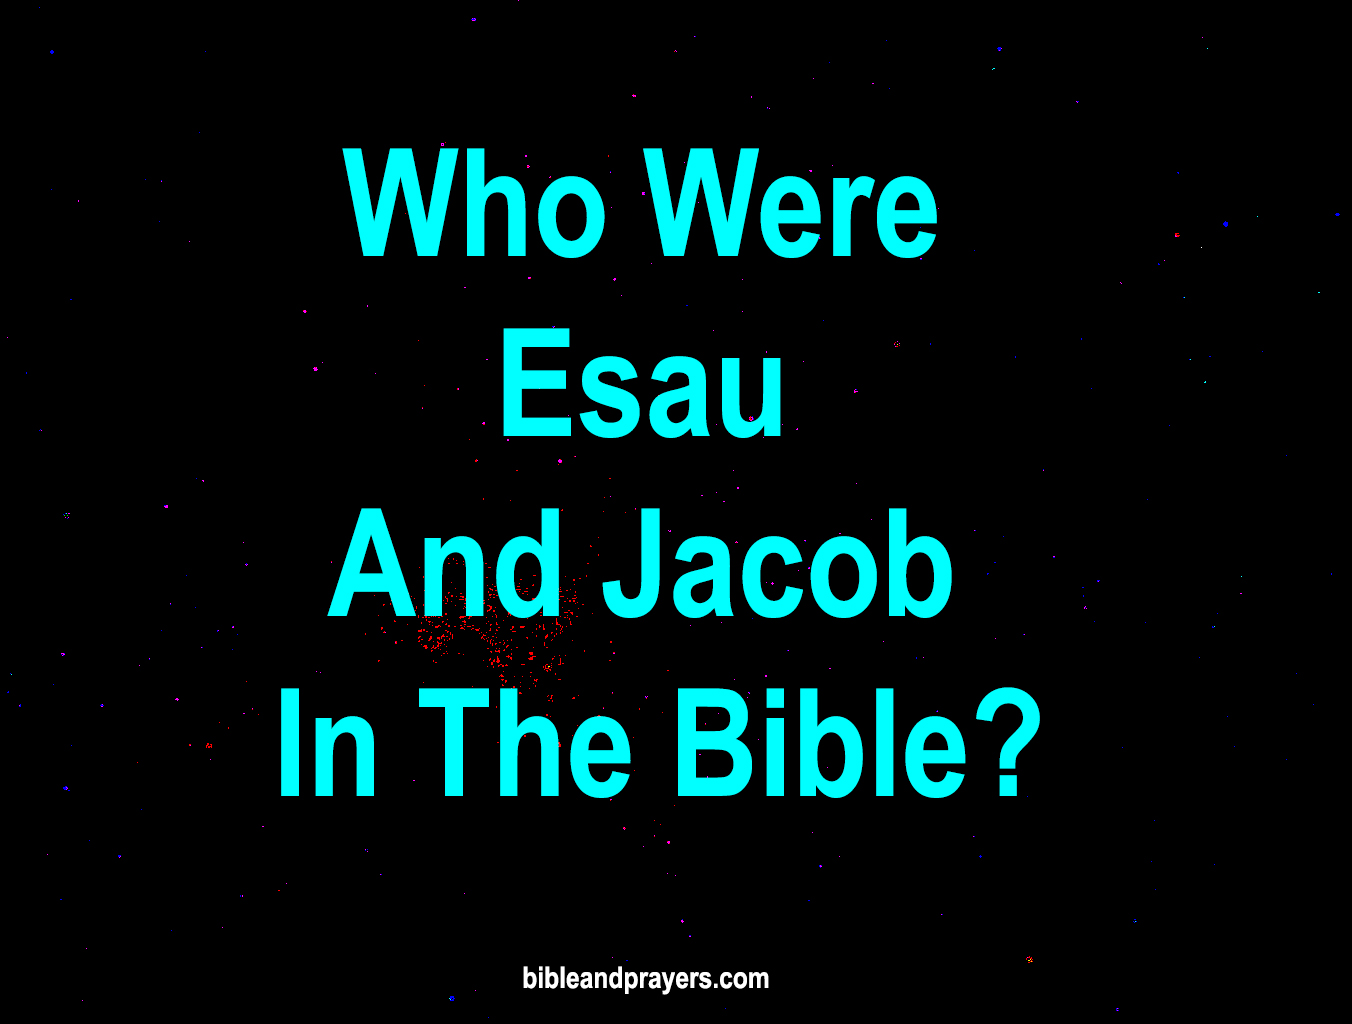 Who Were Esau And Jacob In The Bible?